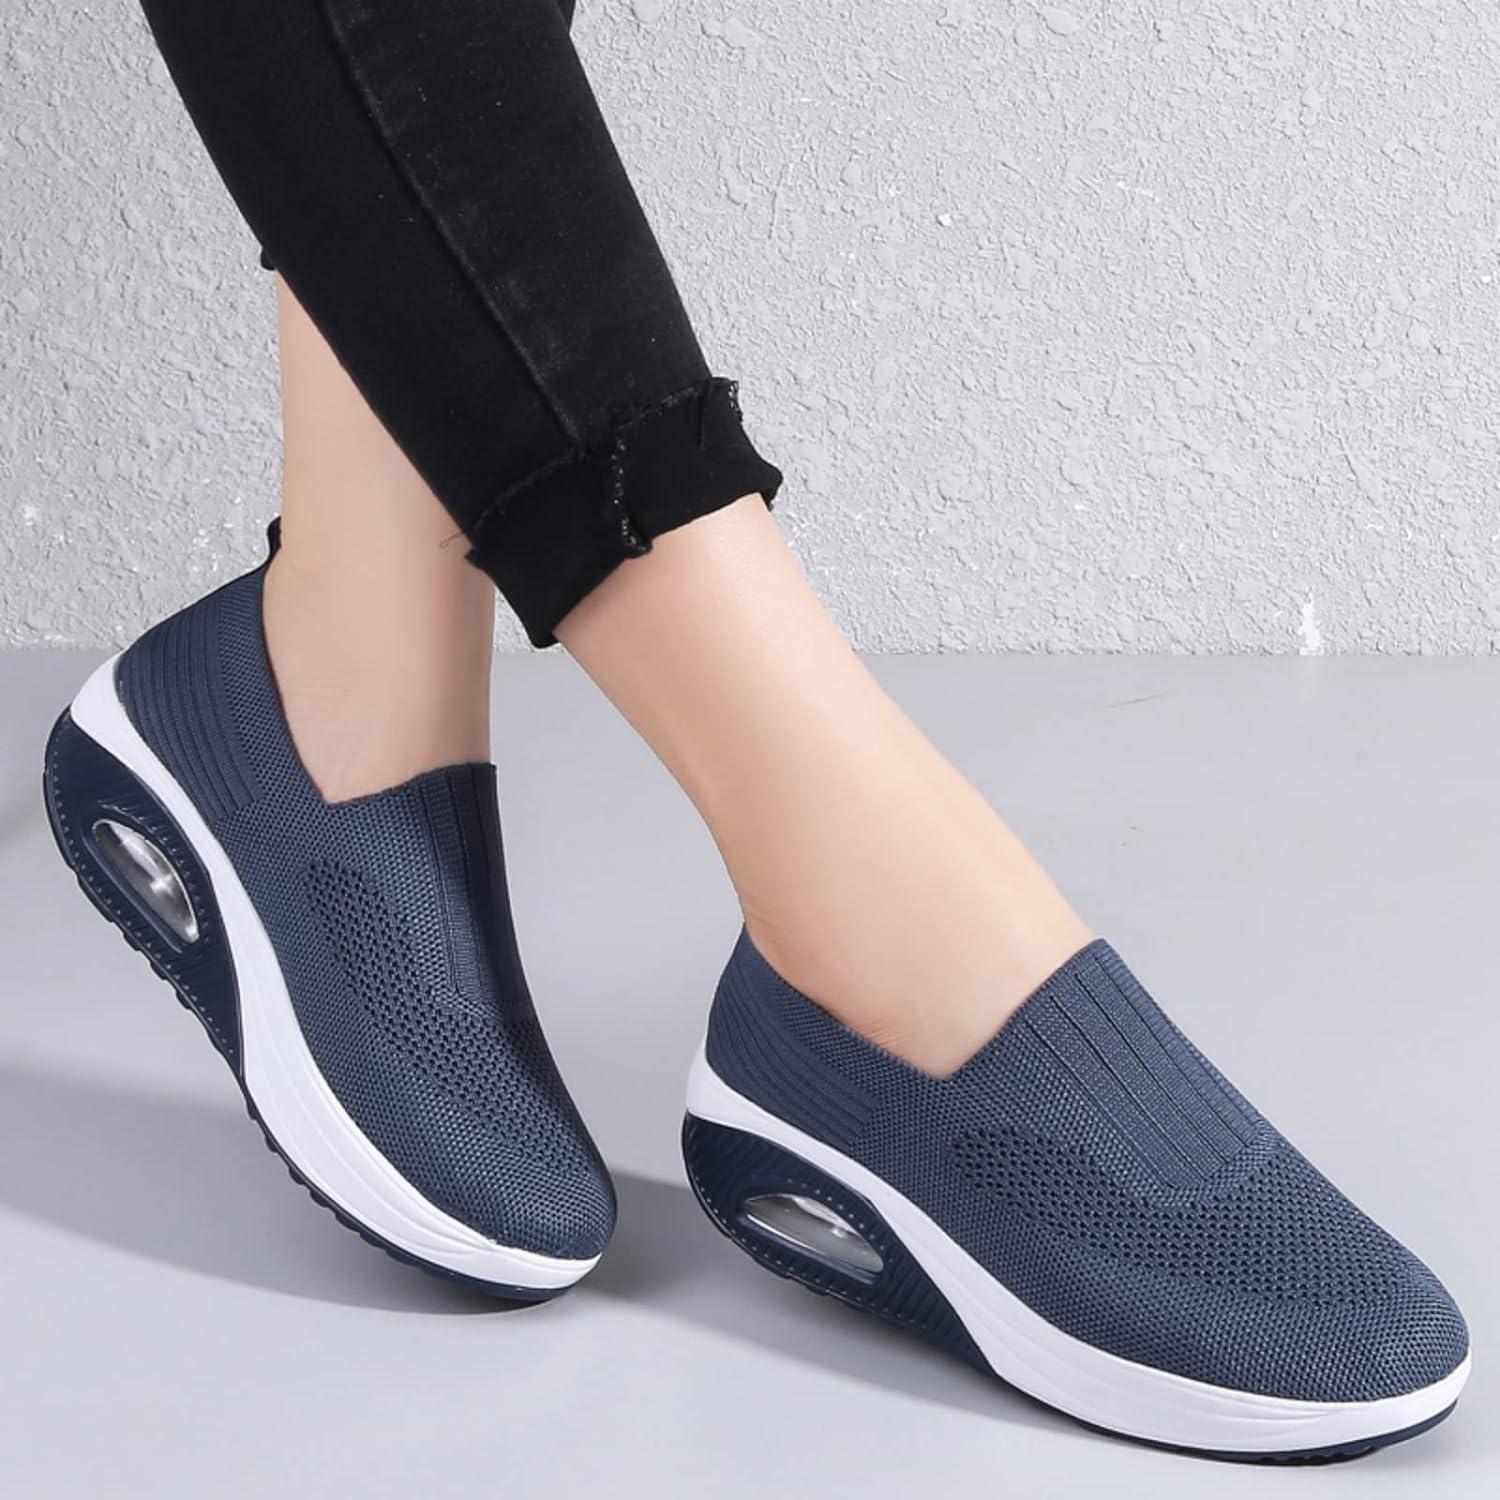 Sneakers Shoes Fashion Breathable Lace Up Thick Sole Ladies Vulcanized  Shoes Summer Flat Mesh Sneakers Ladies Running Shoes-Blue,42 :  Amazon.co.uk: Fashion